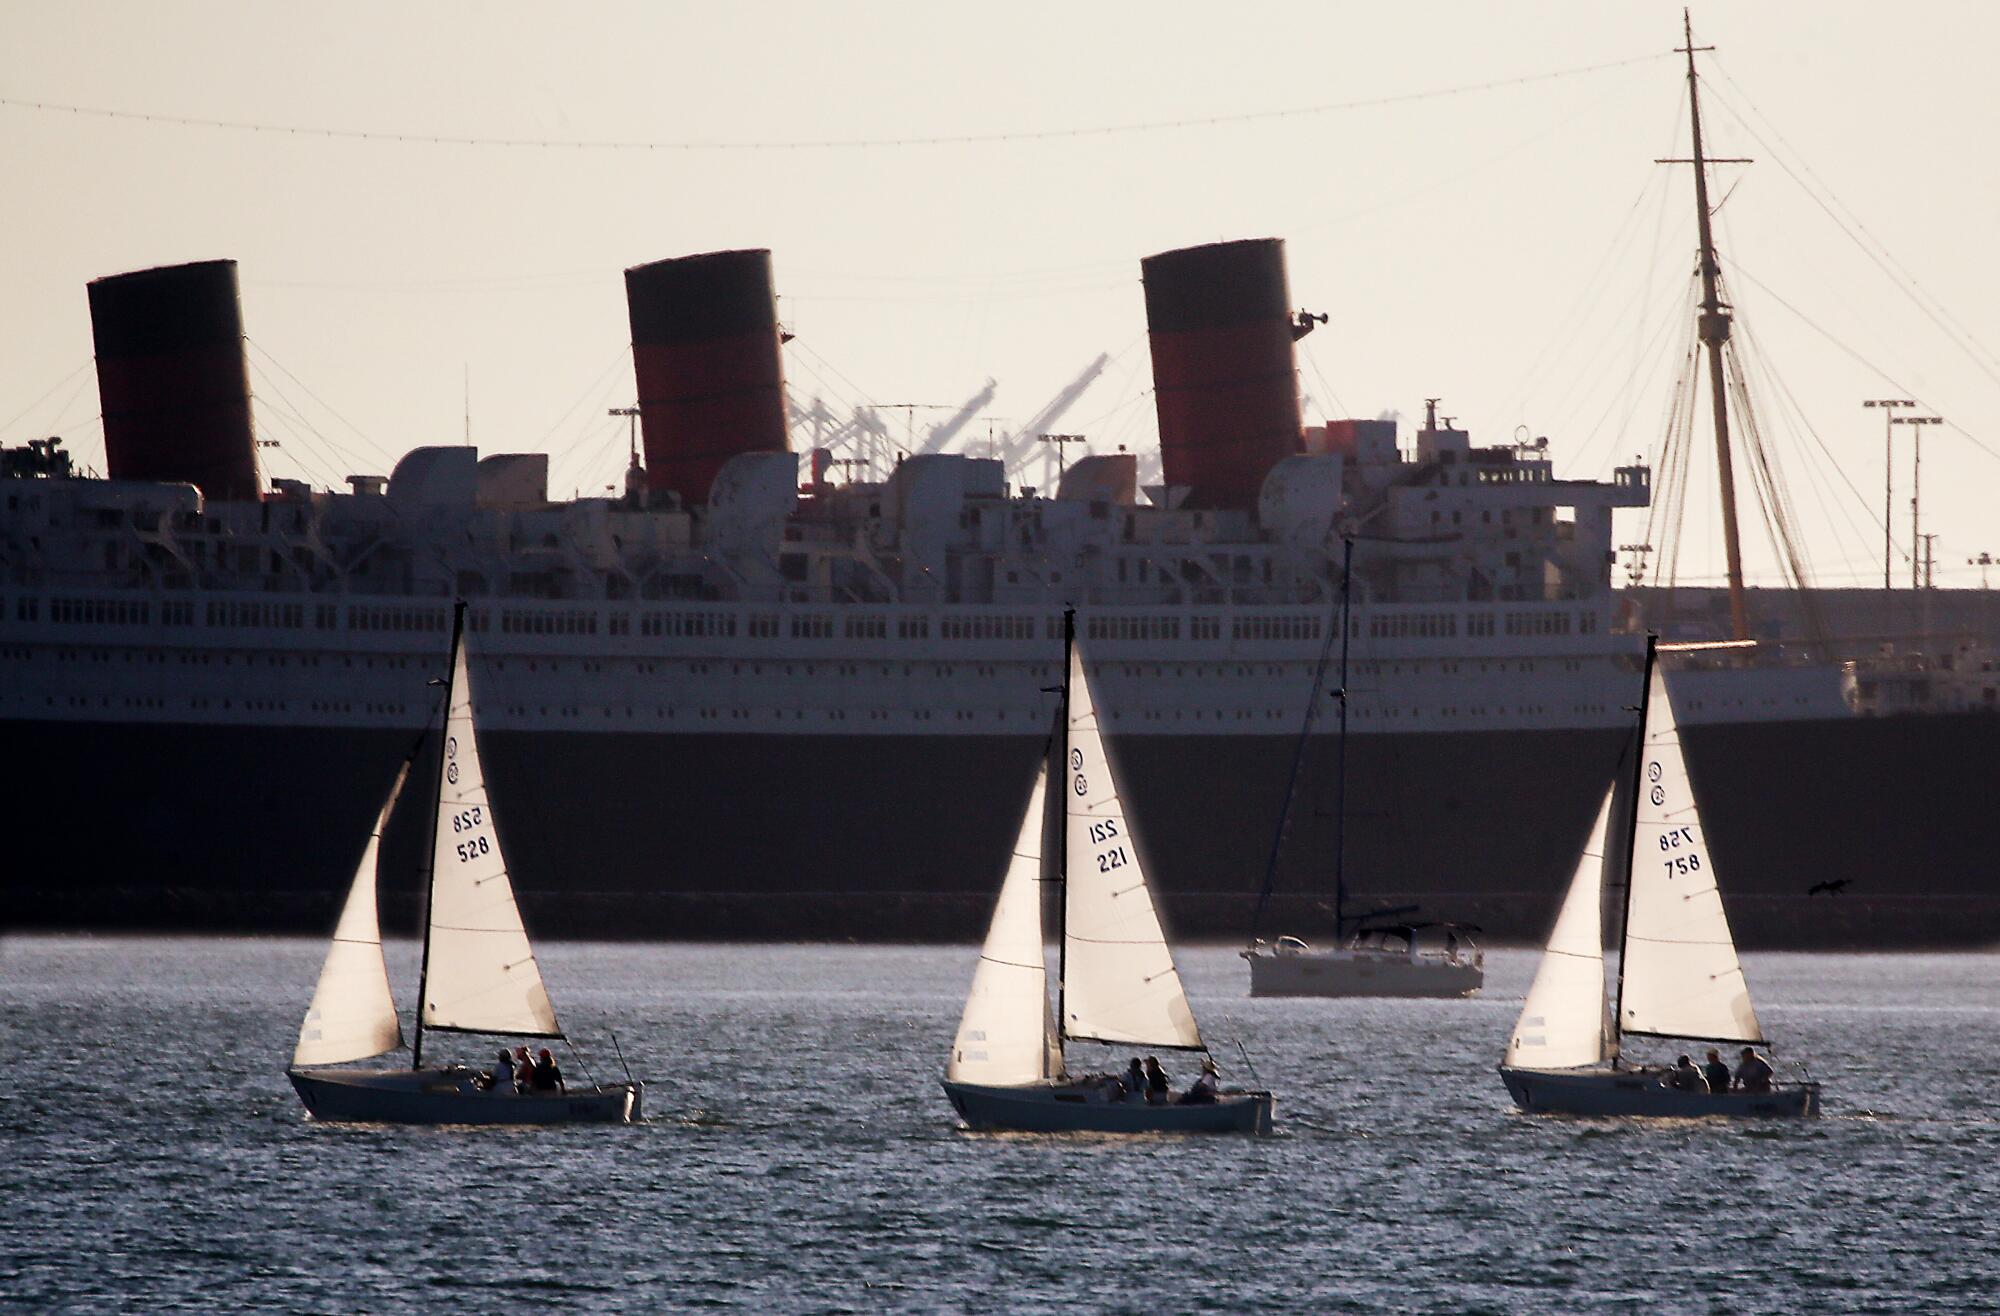 Sailboats race past the Queen Mary as a sea breeze cools the Port of Long Beach.